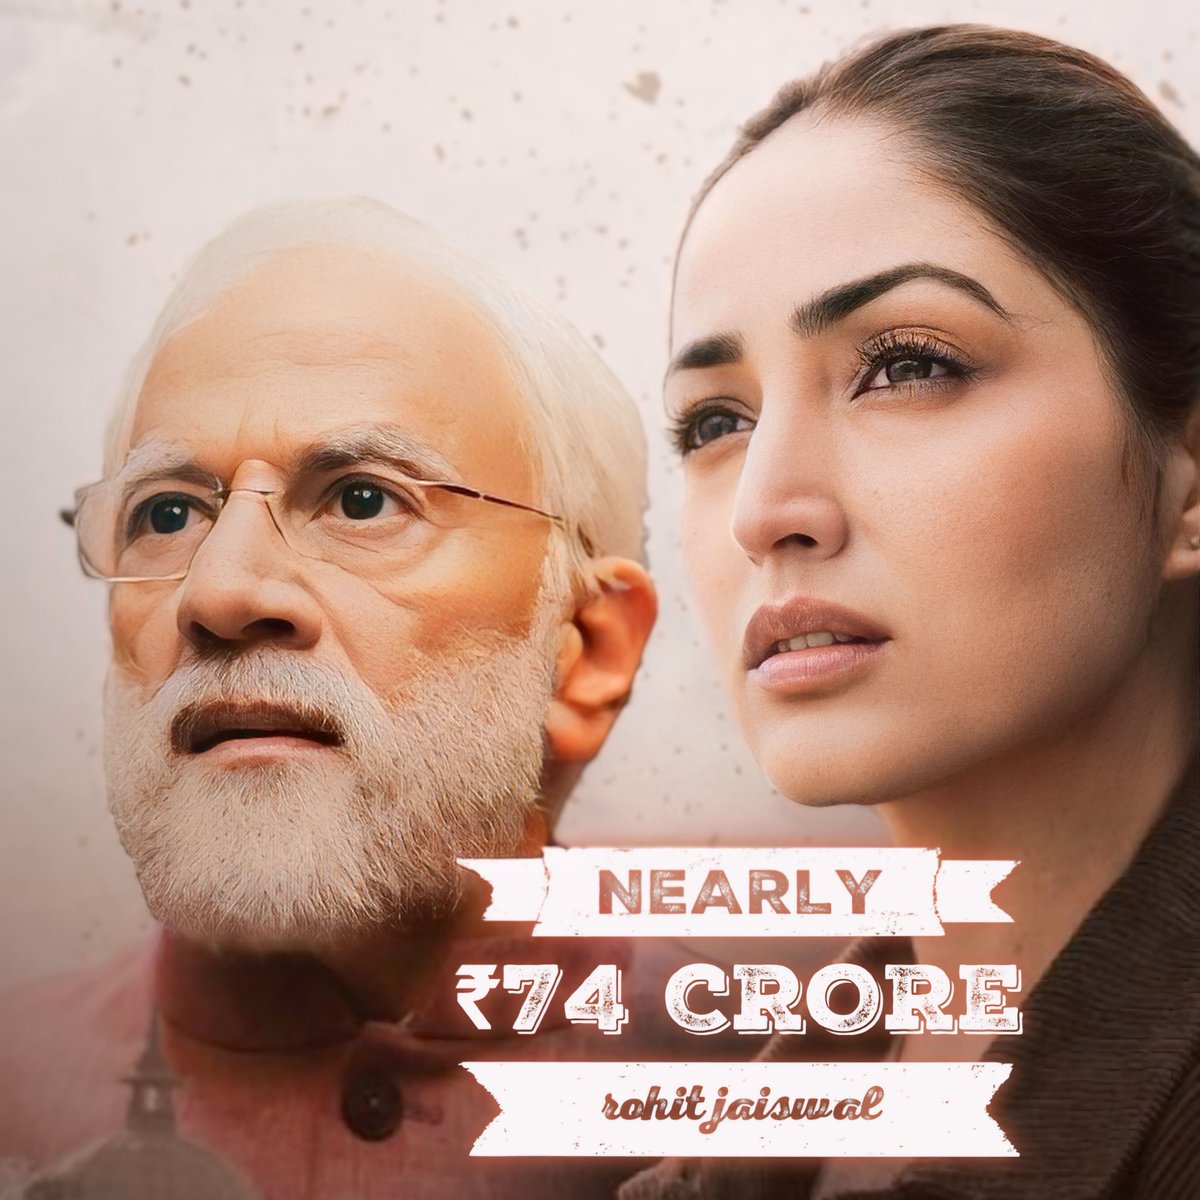 #Article370 Verdict - SUPERHIT 

Total collection in India by end of week 3 now stands nearly ₹74cr Nett in INDIA….. WW Gross now stands at ₹100cr+, fantastic collection considering low budget film and SHAITAAN Wave….. #YamiGautam #AdityaDhar #JioStudios